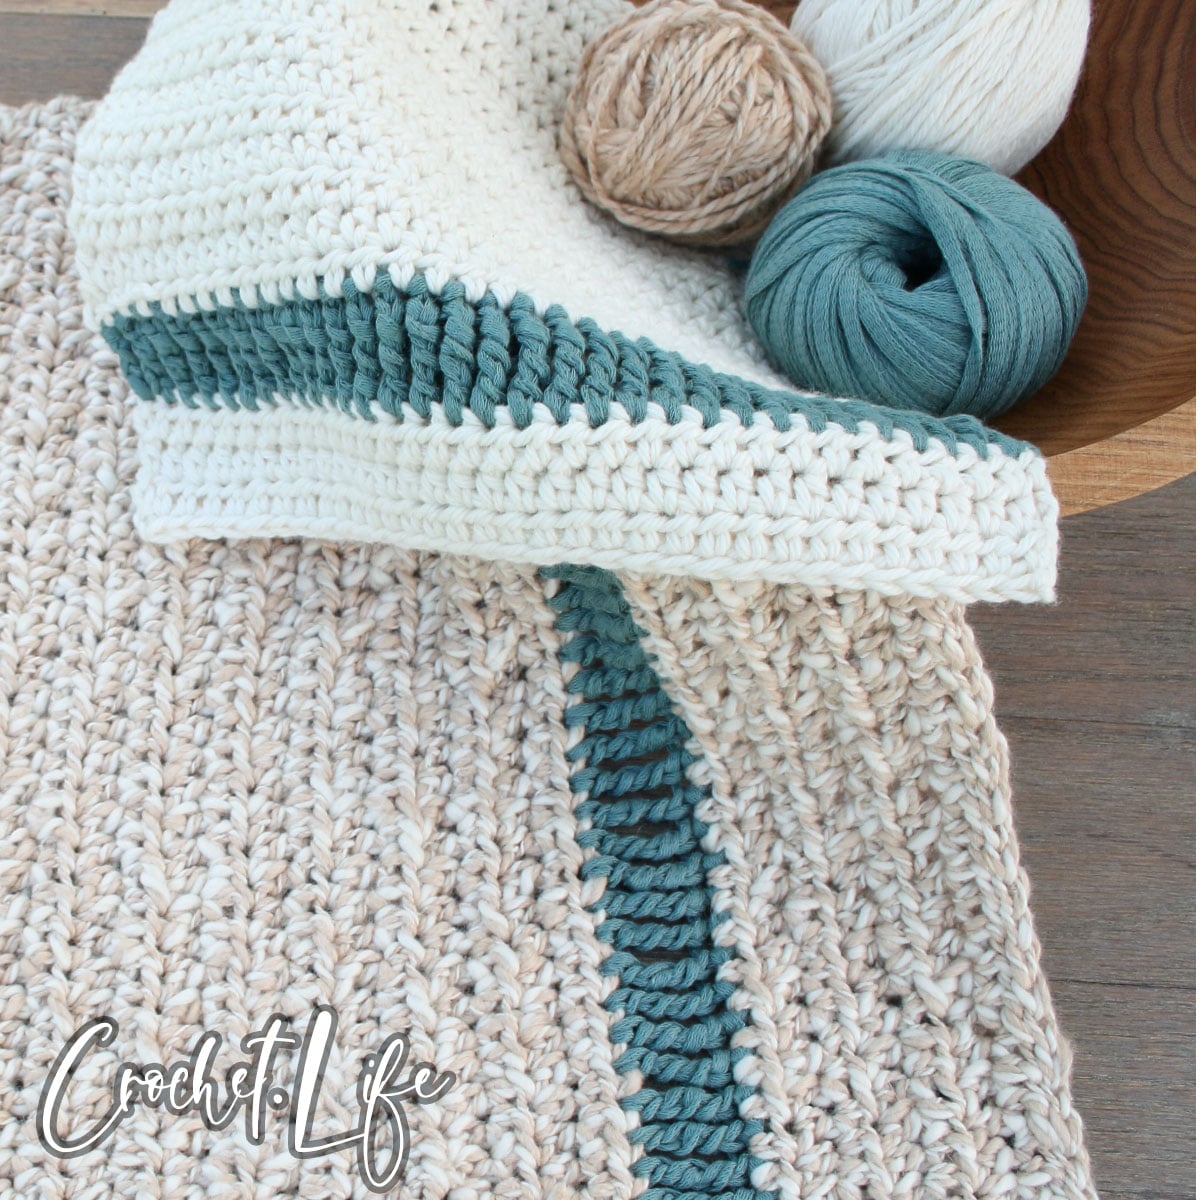 pathways hand towel and dish cloth crochet pattern